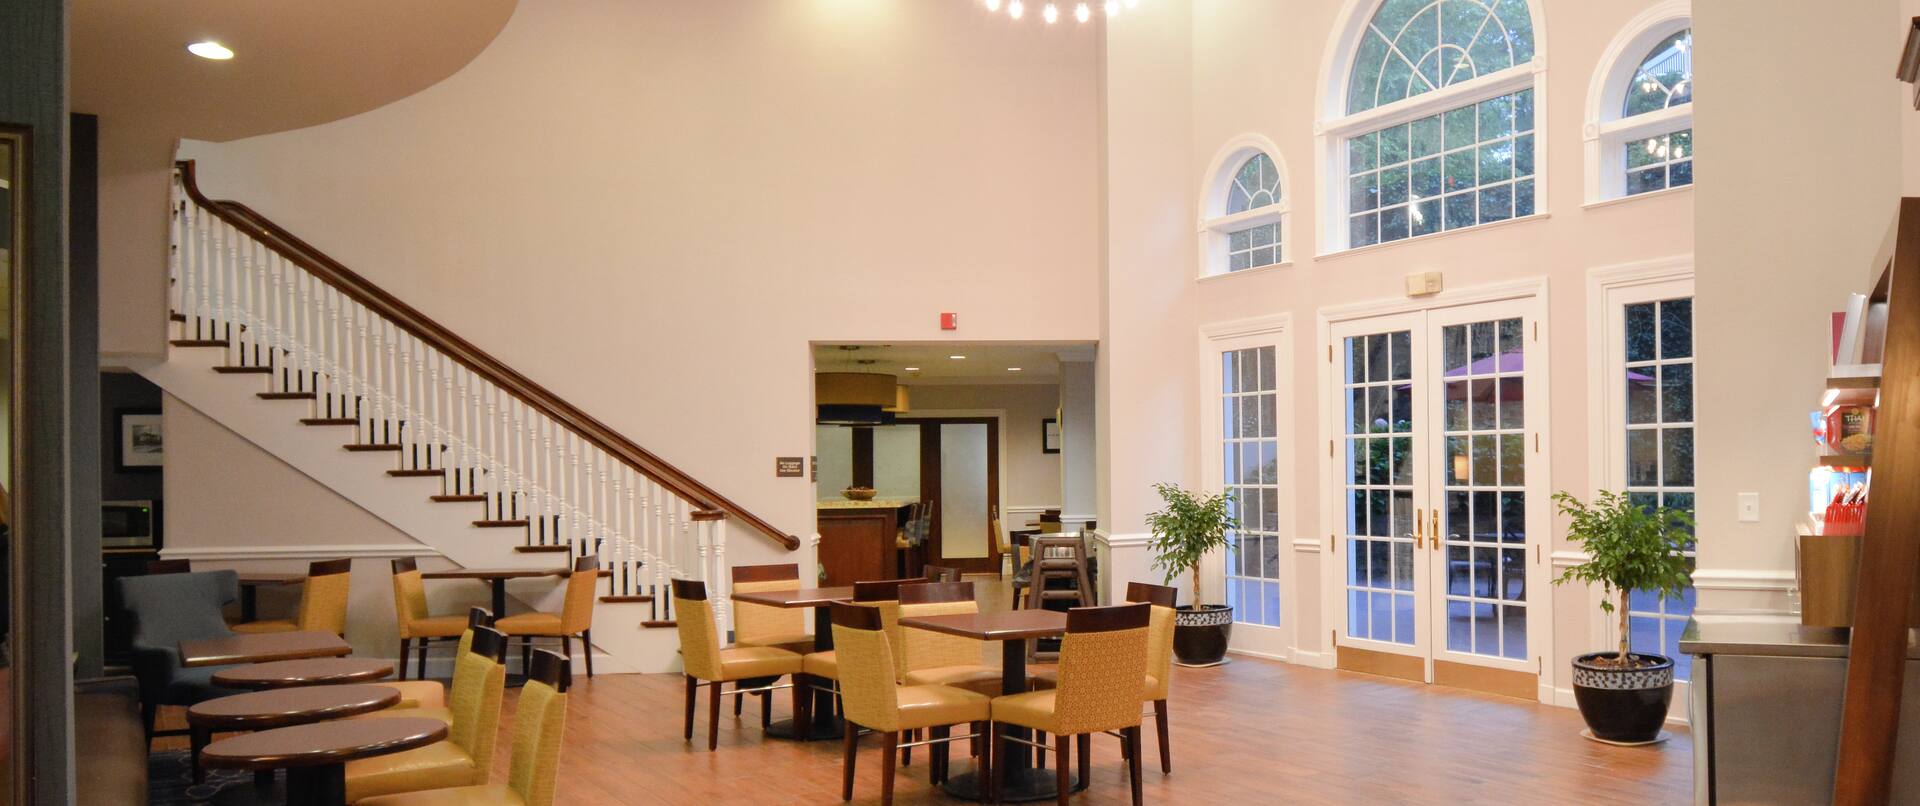 Breakfast Area in Lobby with Glass Doors to Patio and Large Staircase in Background